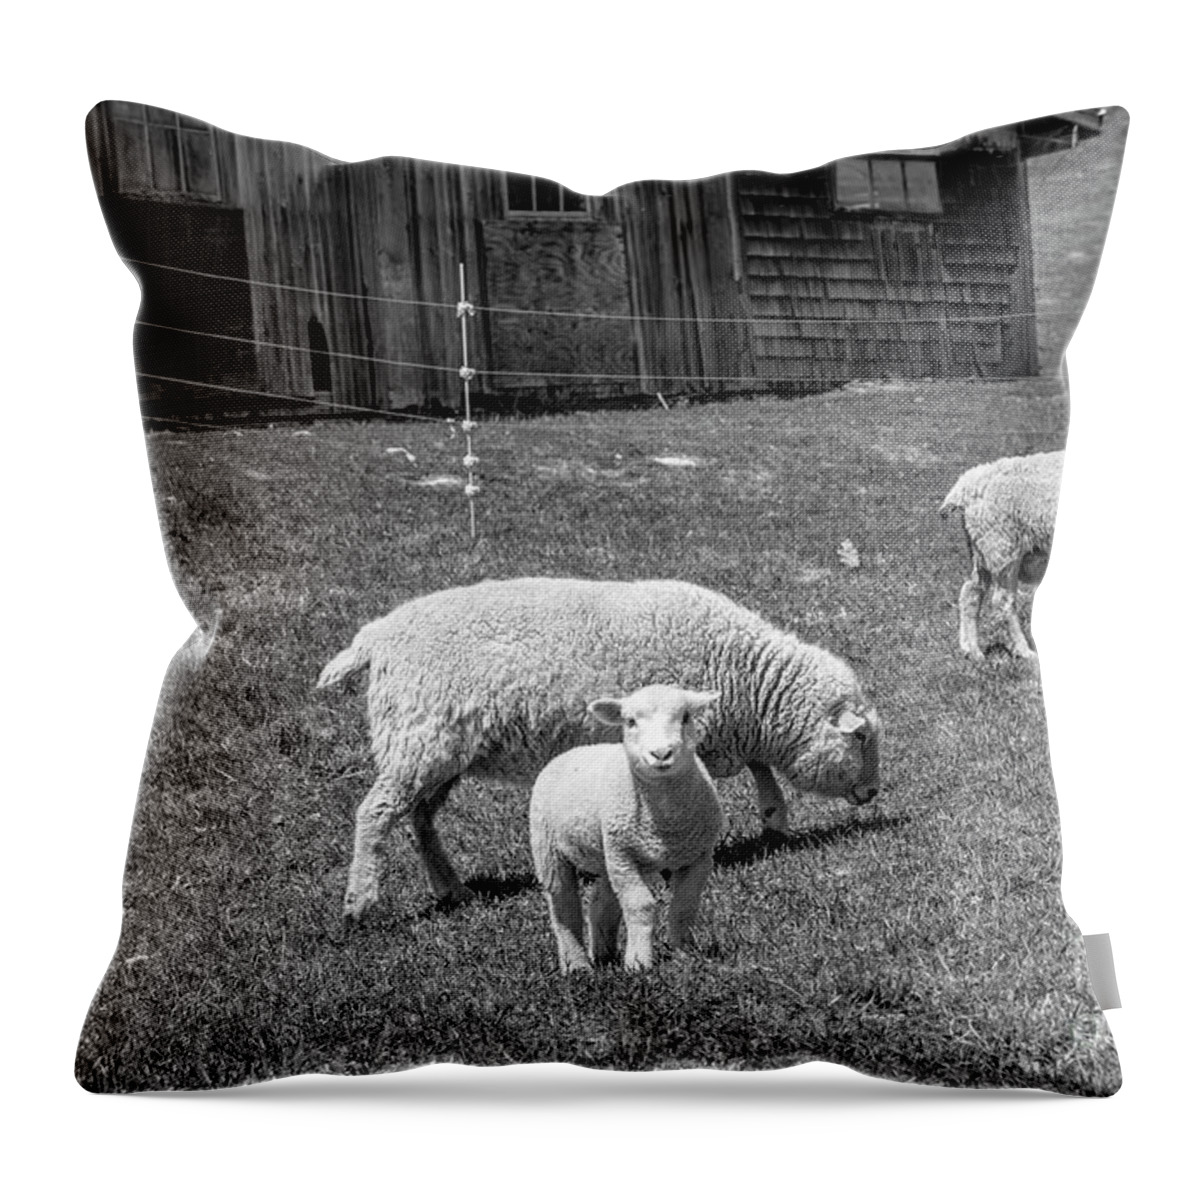 Lamb Throw Pillow featuring the photograph Lamb by Alana Ranney